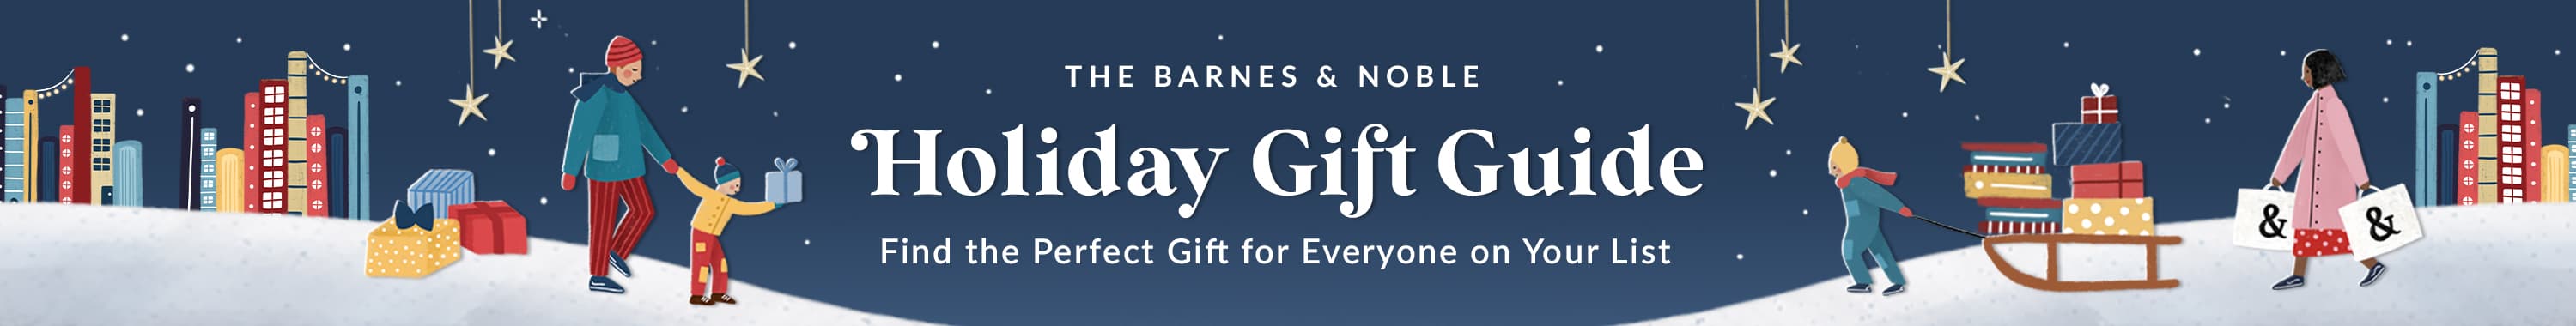 The Barnes & Noble Holiday Gift Guide! Find the perfect gift for everyone on your list